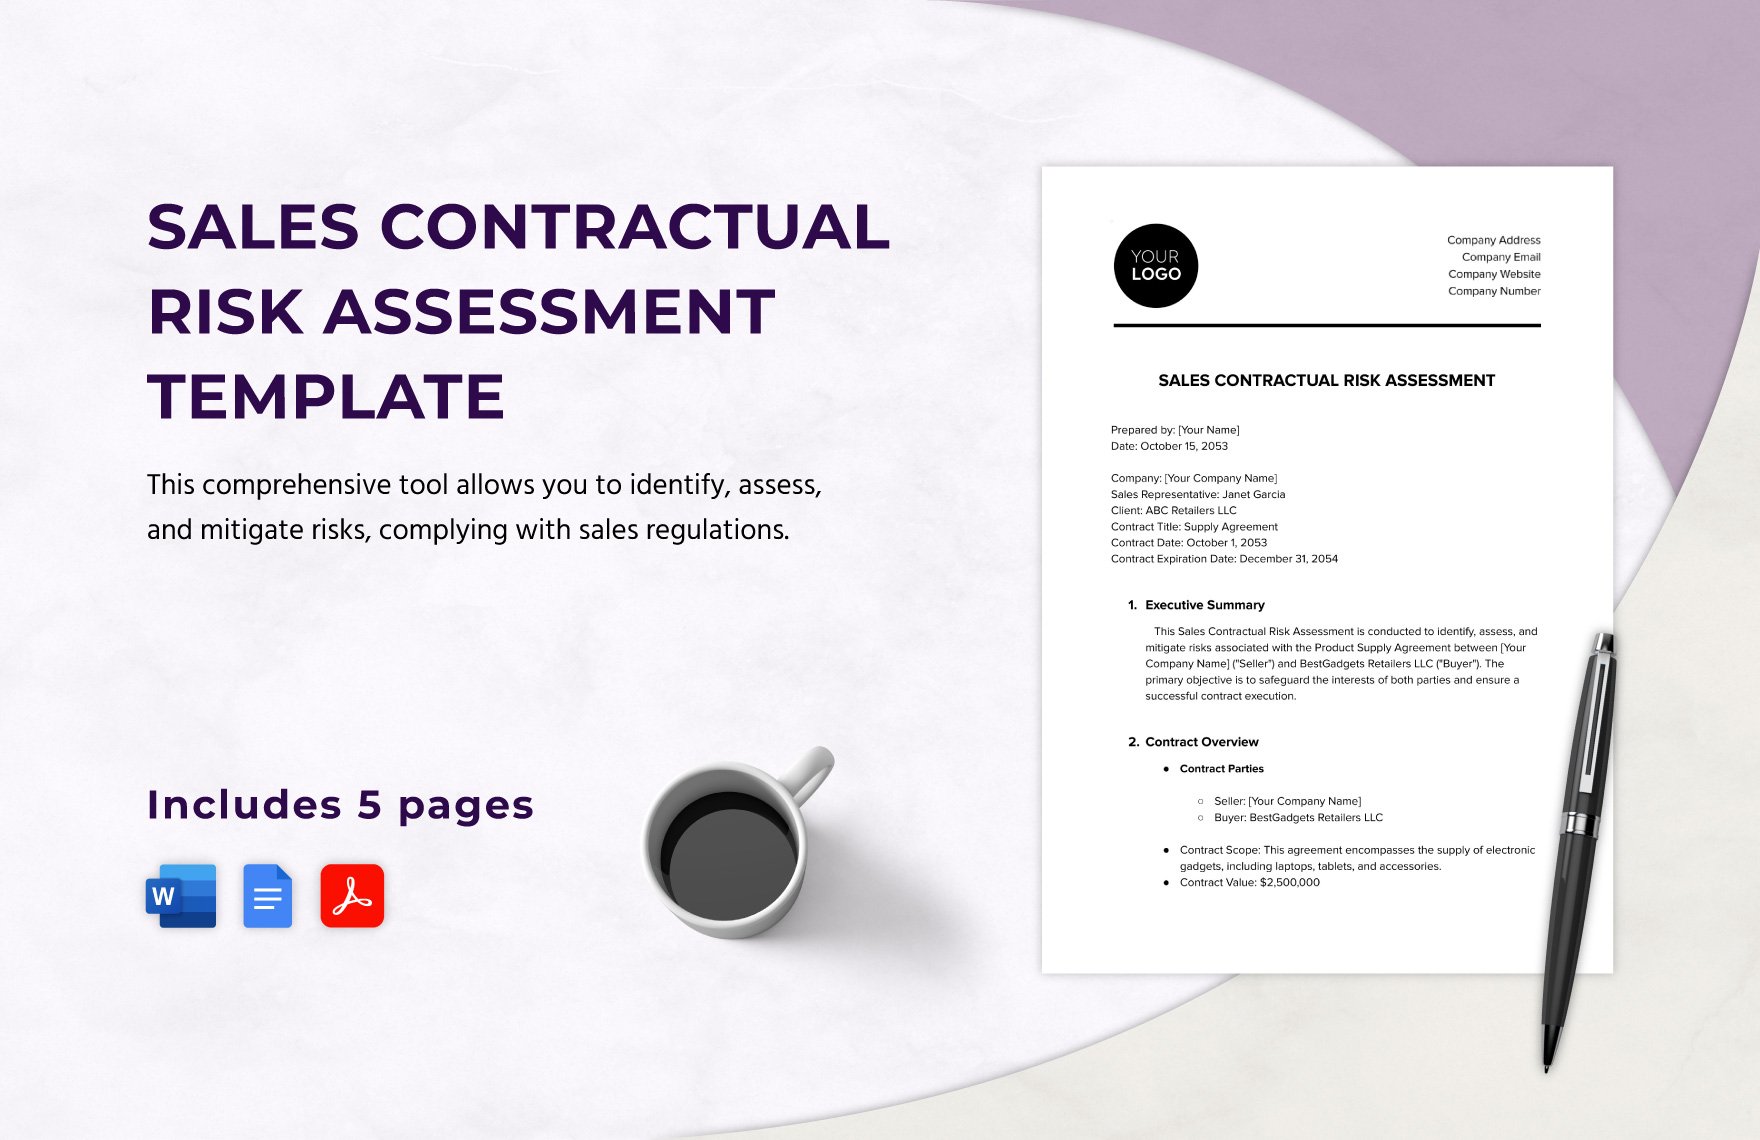 Sales Contractual Risk Assessment Template in Word, Google Docs, PDF